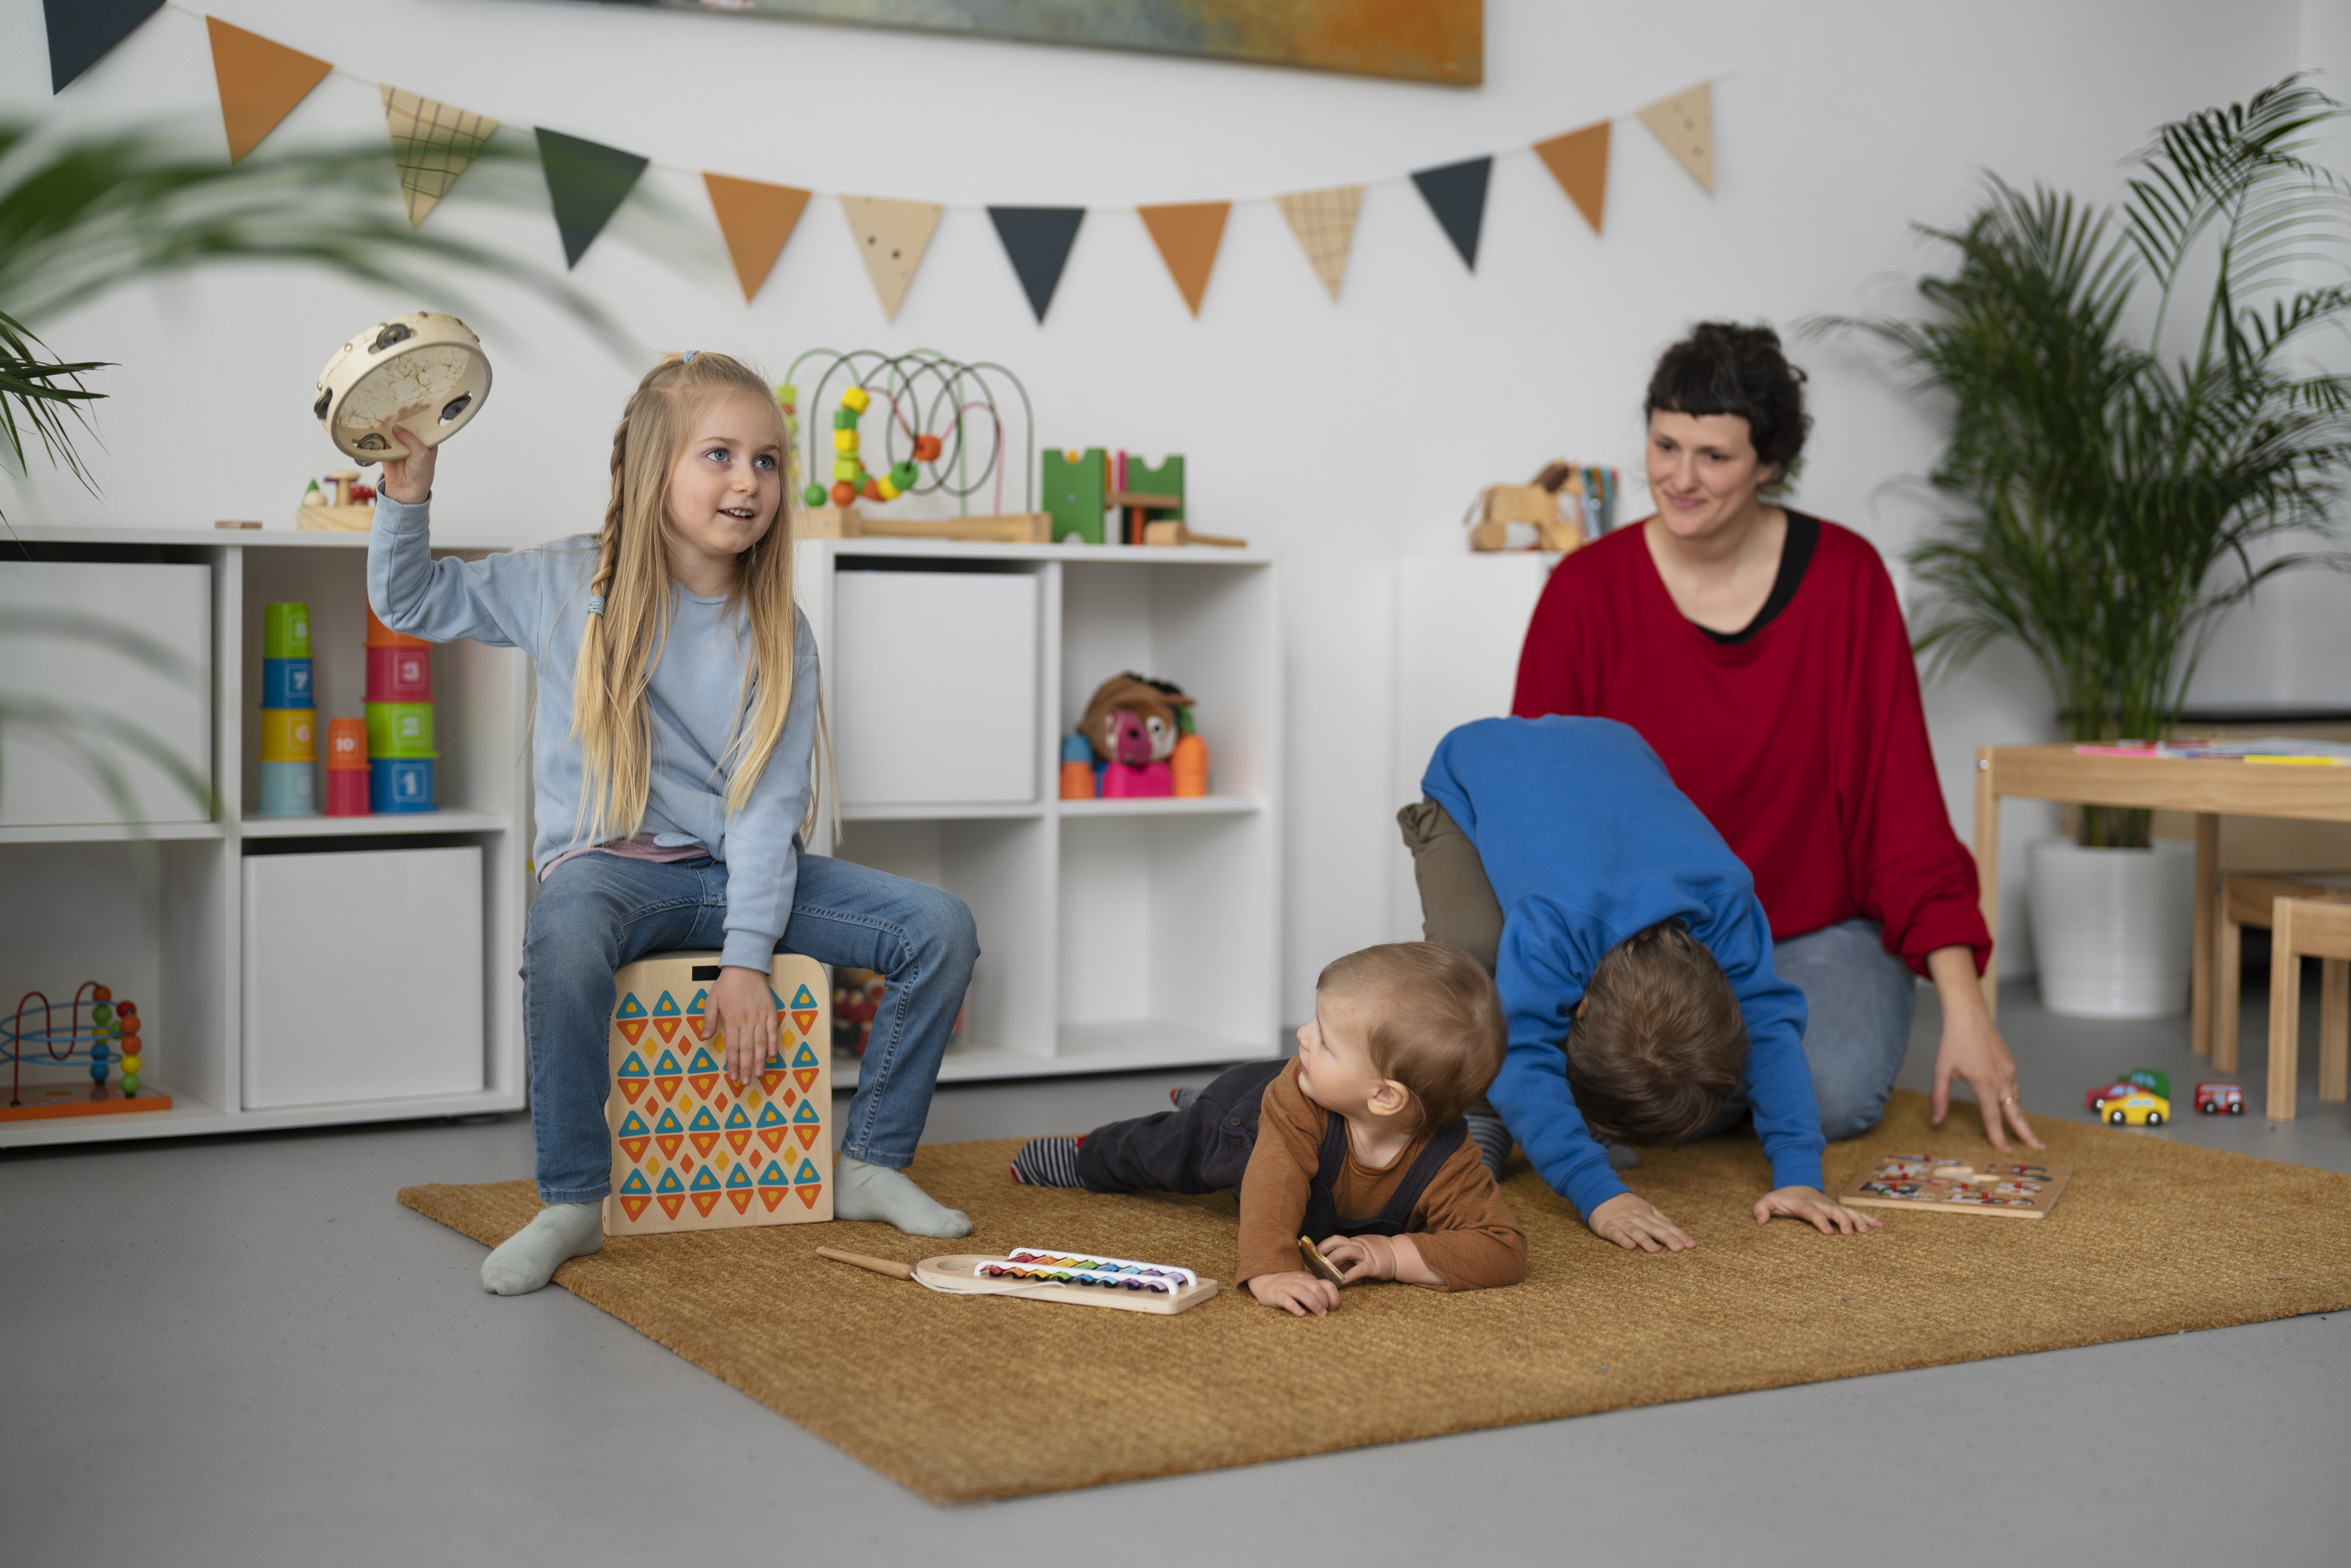 5 Fun-Filled Indoor Activities for Quality Time With Kids